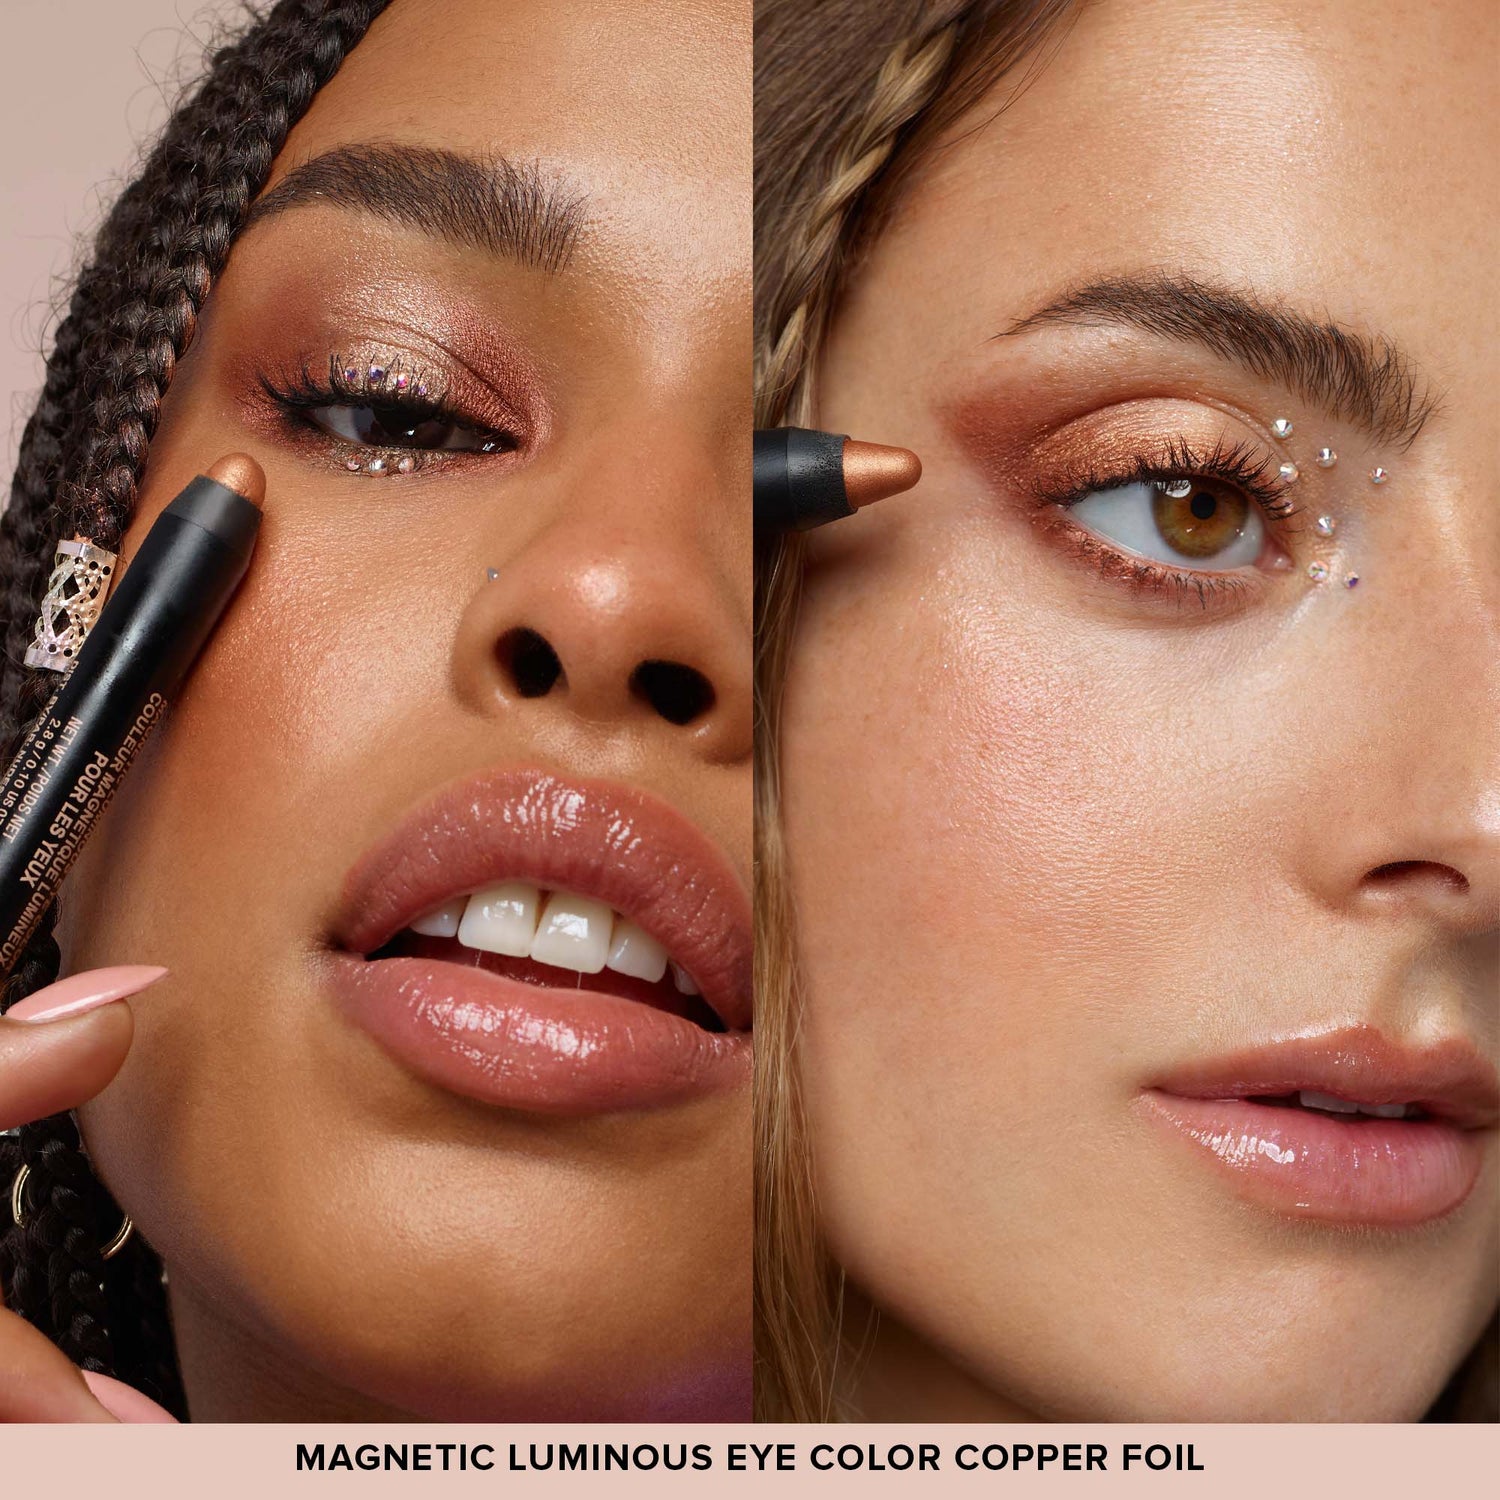 Two young women applying Magnetic Luminous Eye Color in shade Copper Foil